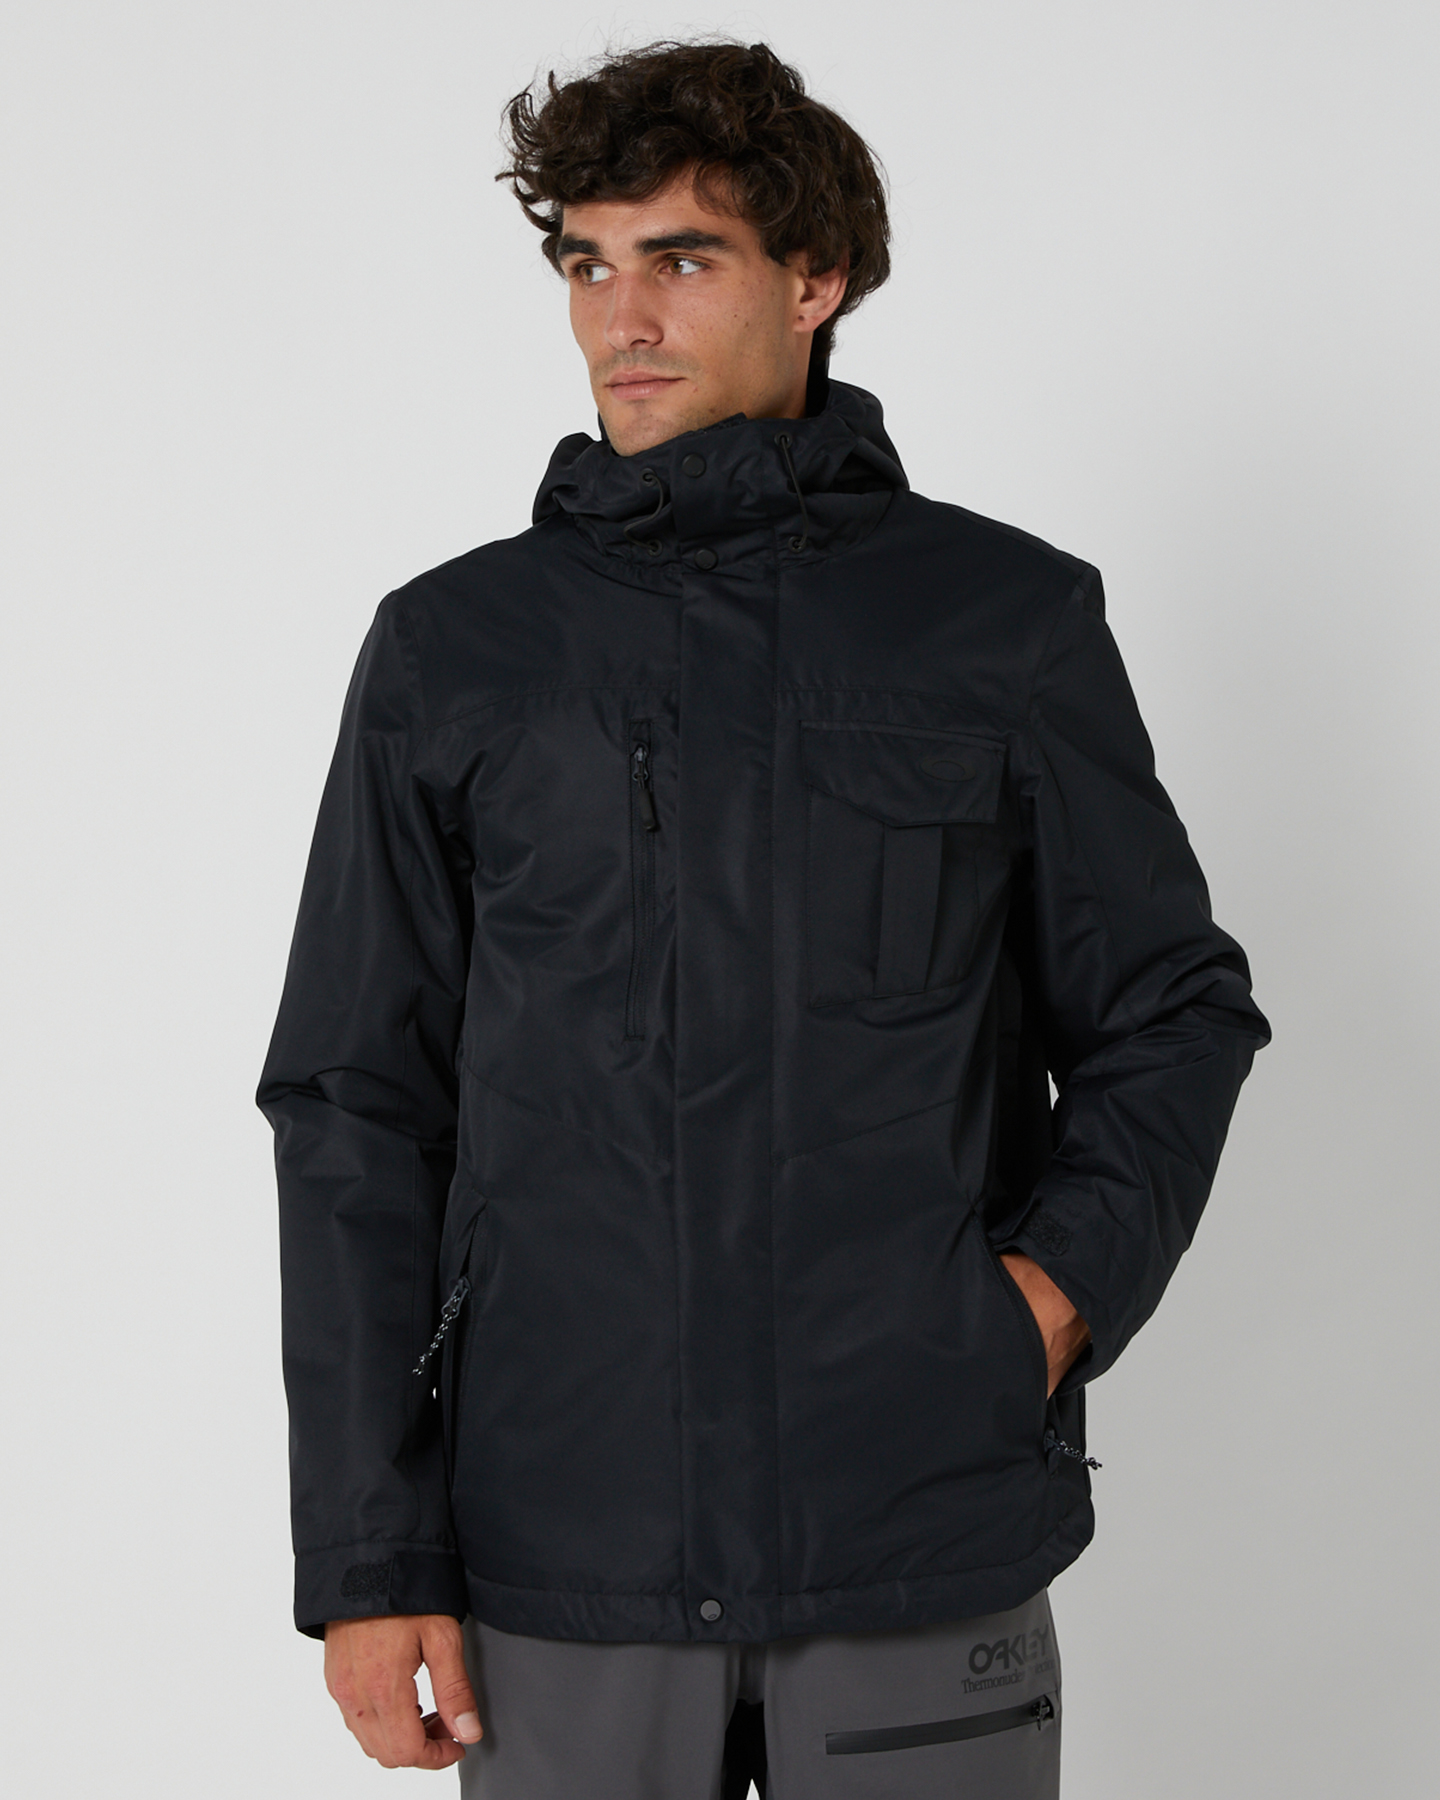 Oakley Core Divisional Rc Insulated Snow Jacket - Blackout | SurfStitch